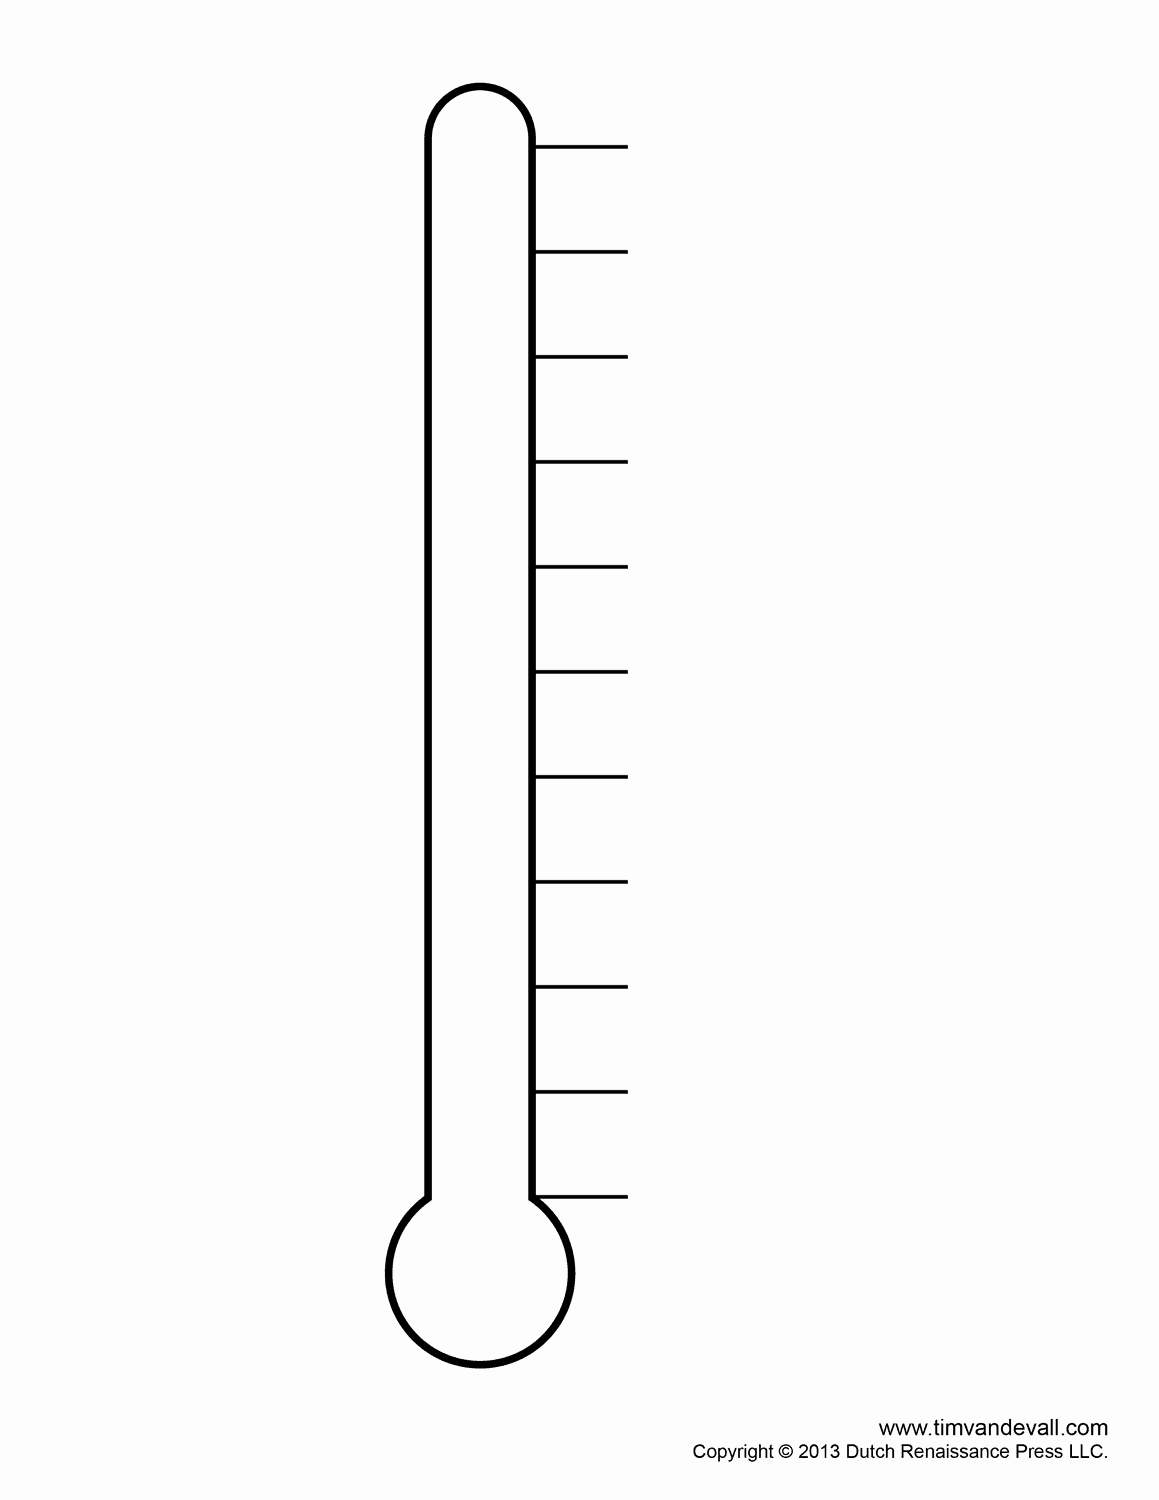 Fundraising thermometer Image Luxury Pin by ashley Janson On Finances